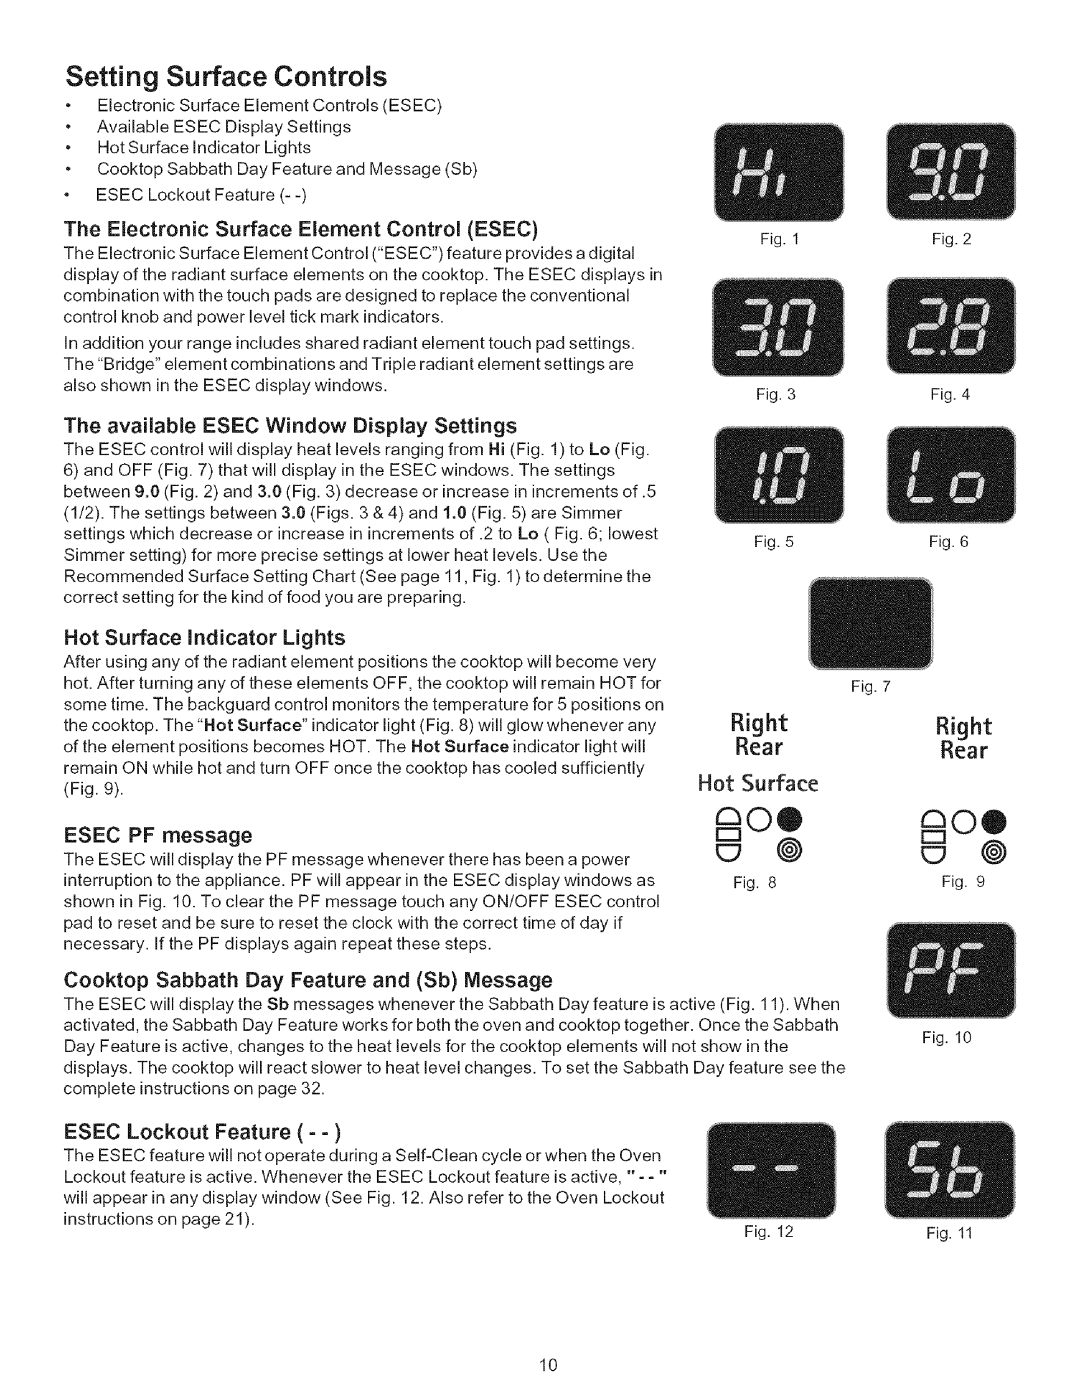 Kenmore 9664 Setting Surface Controls, @ rm, Hot Surface, The Electronic Surface Element Control ESEC, ESEC PF message 